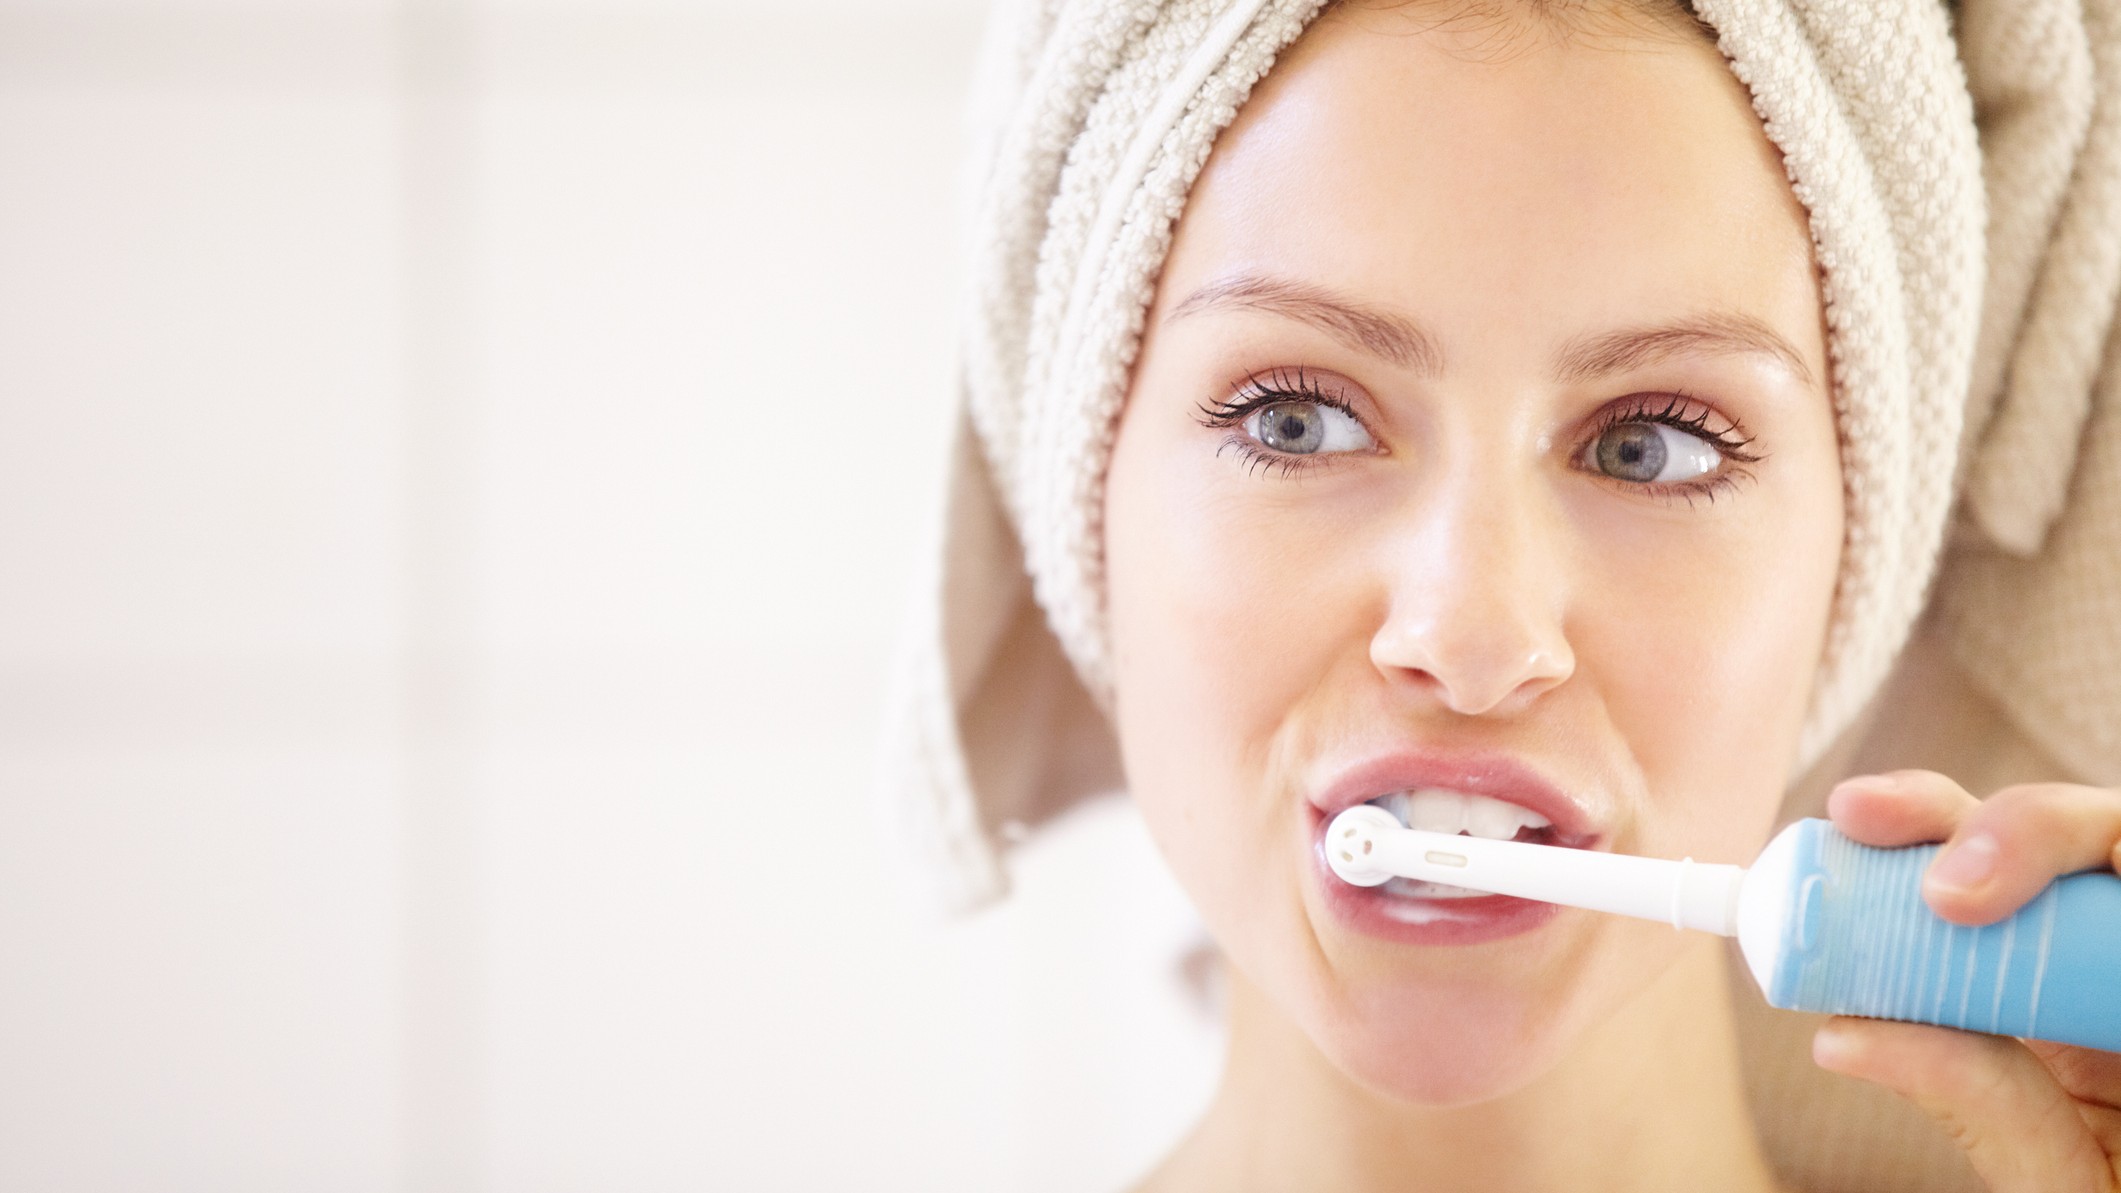 How to Disinfect a Toothbrush: 10 Easy Methods That Work